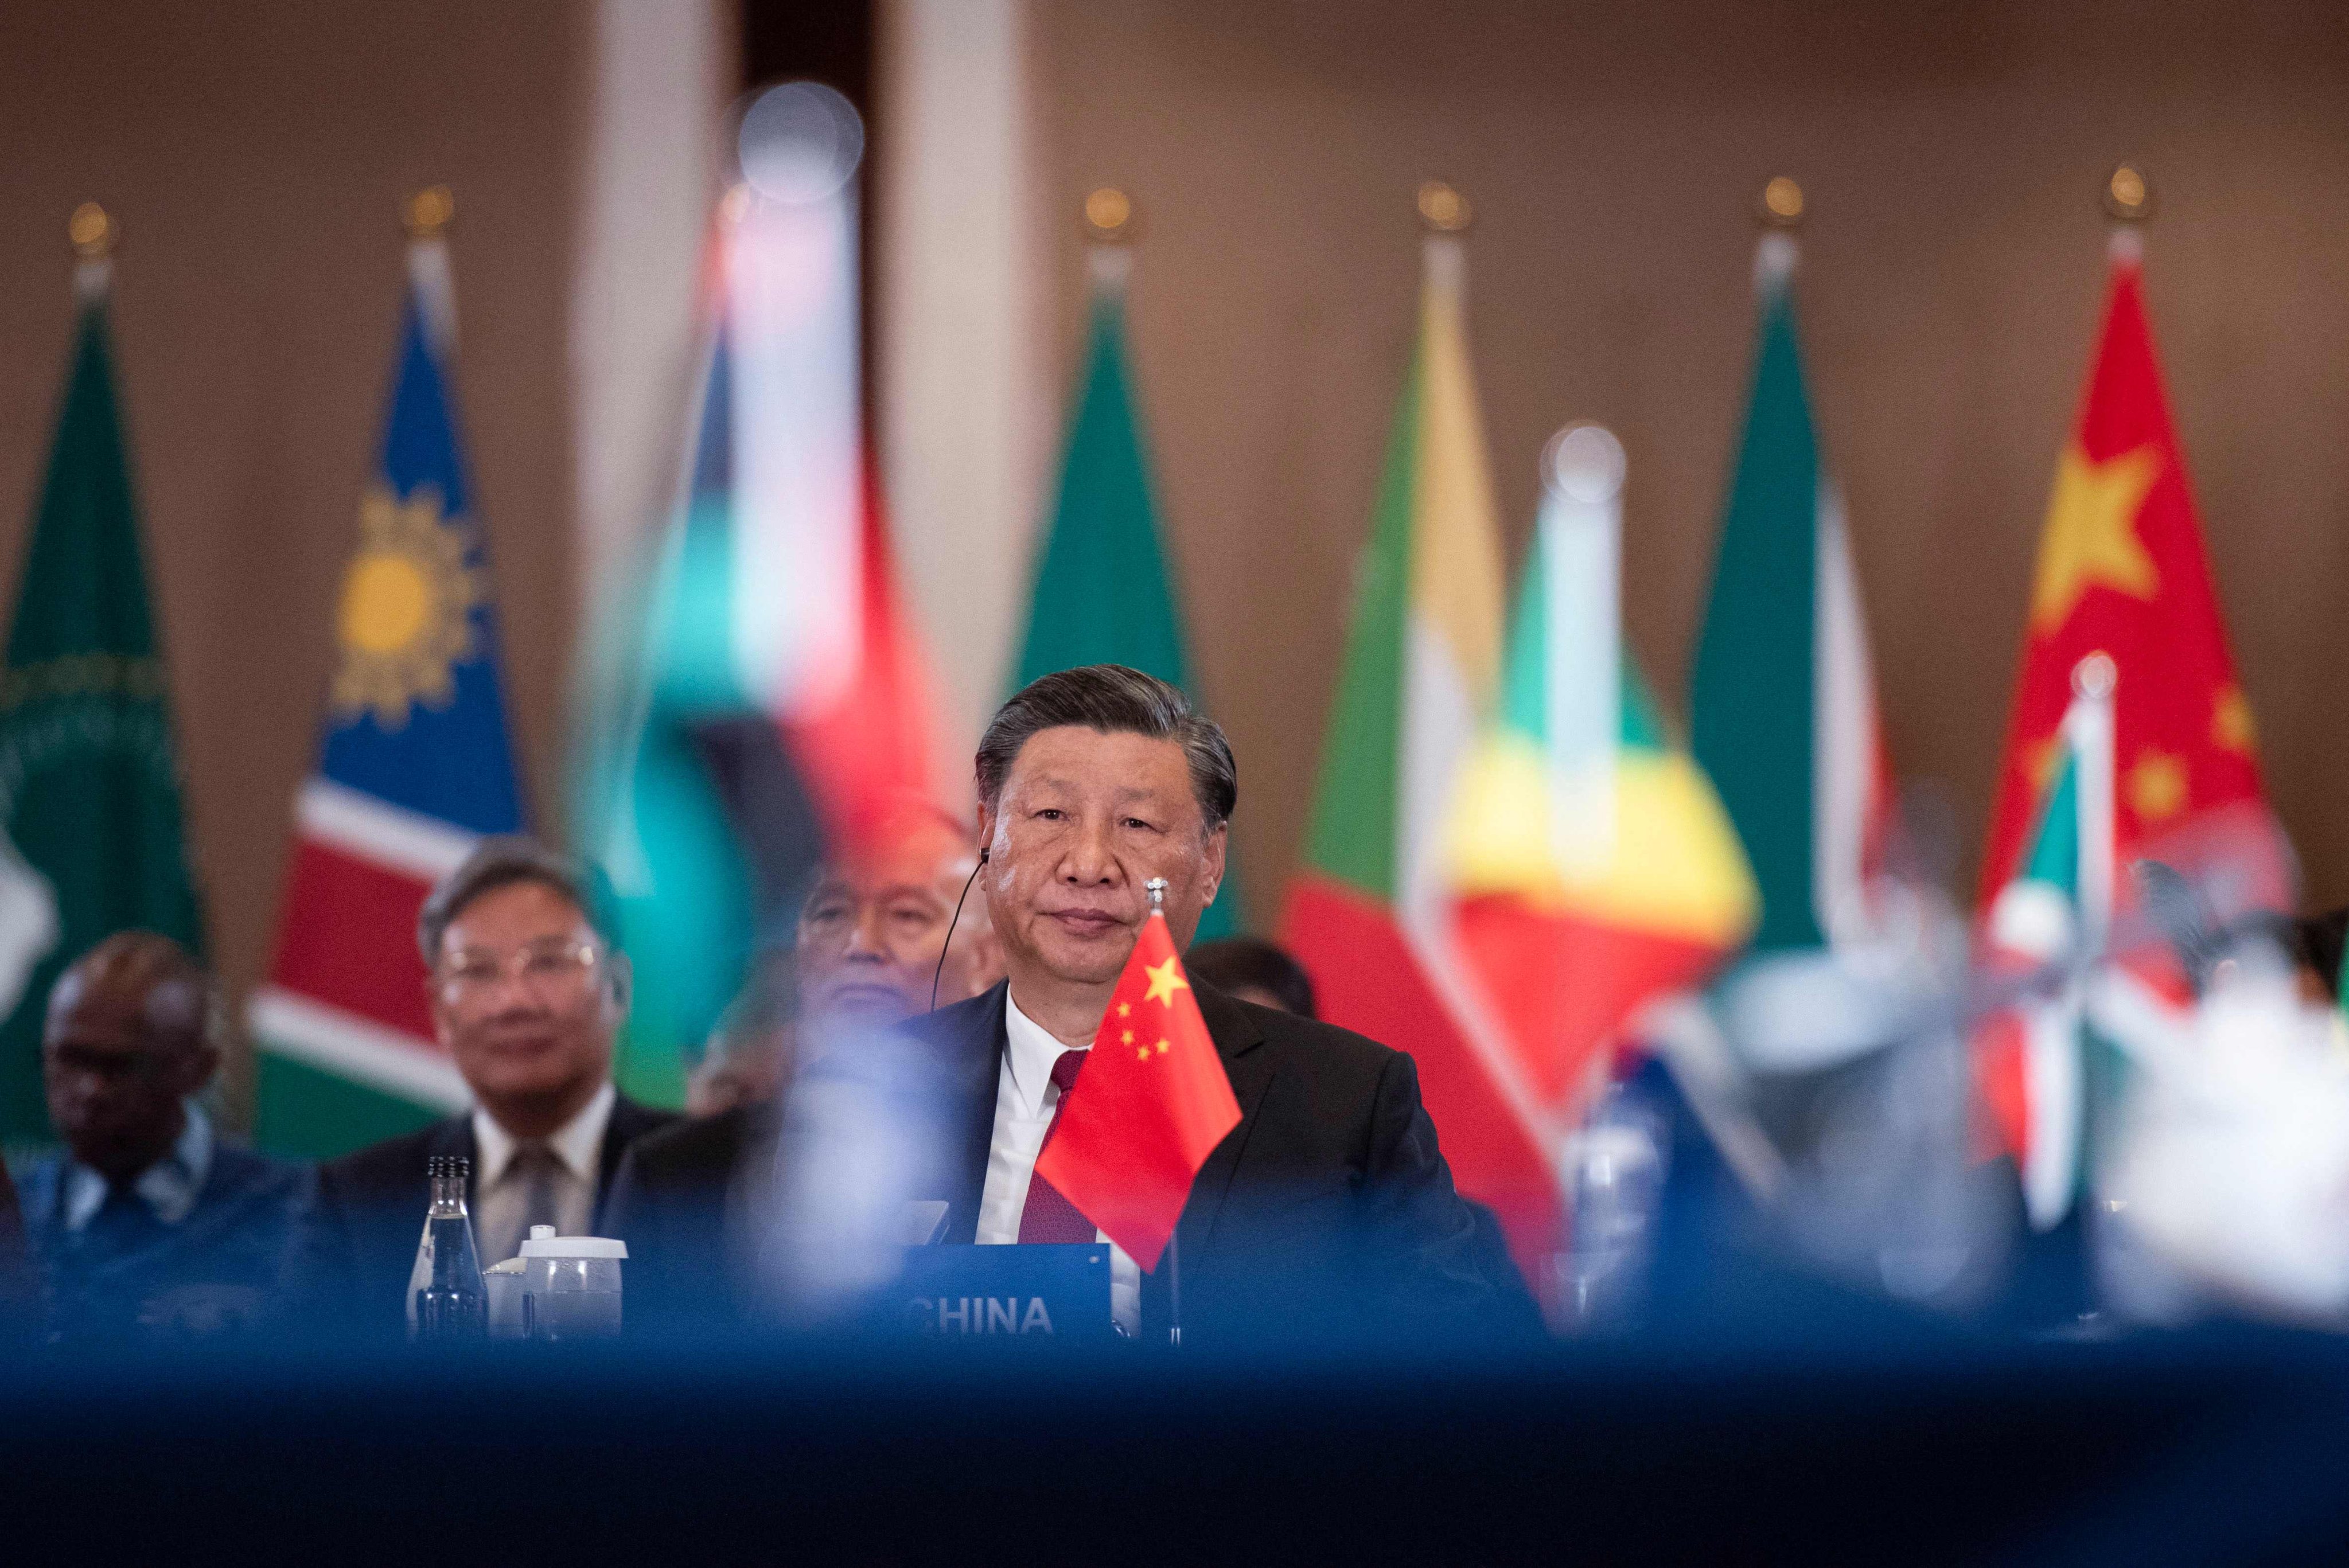 Chinese President Xi Jinping has called the Brics expansion “historic”. Photo: AFP